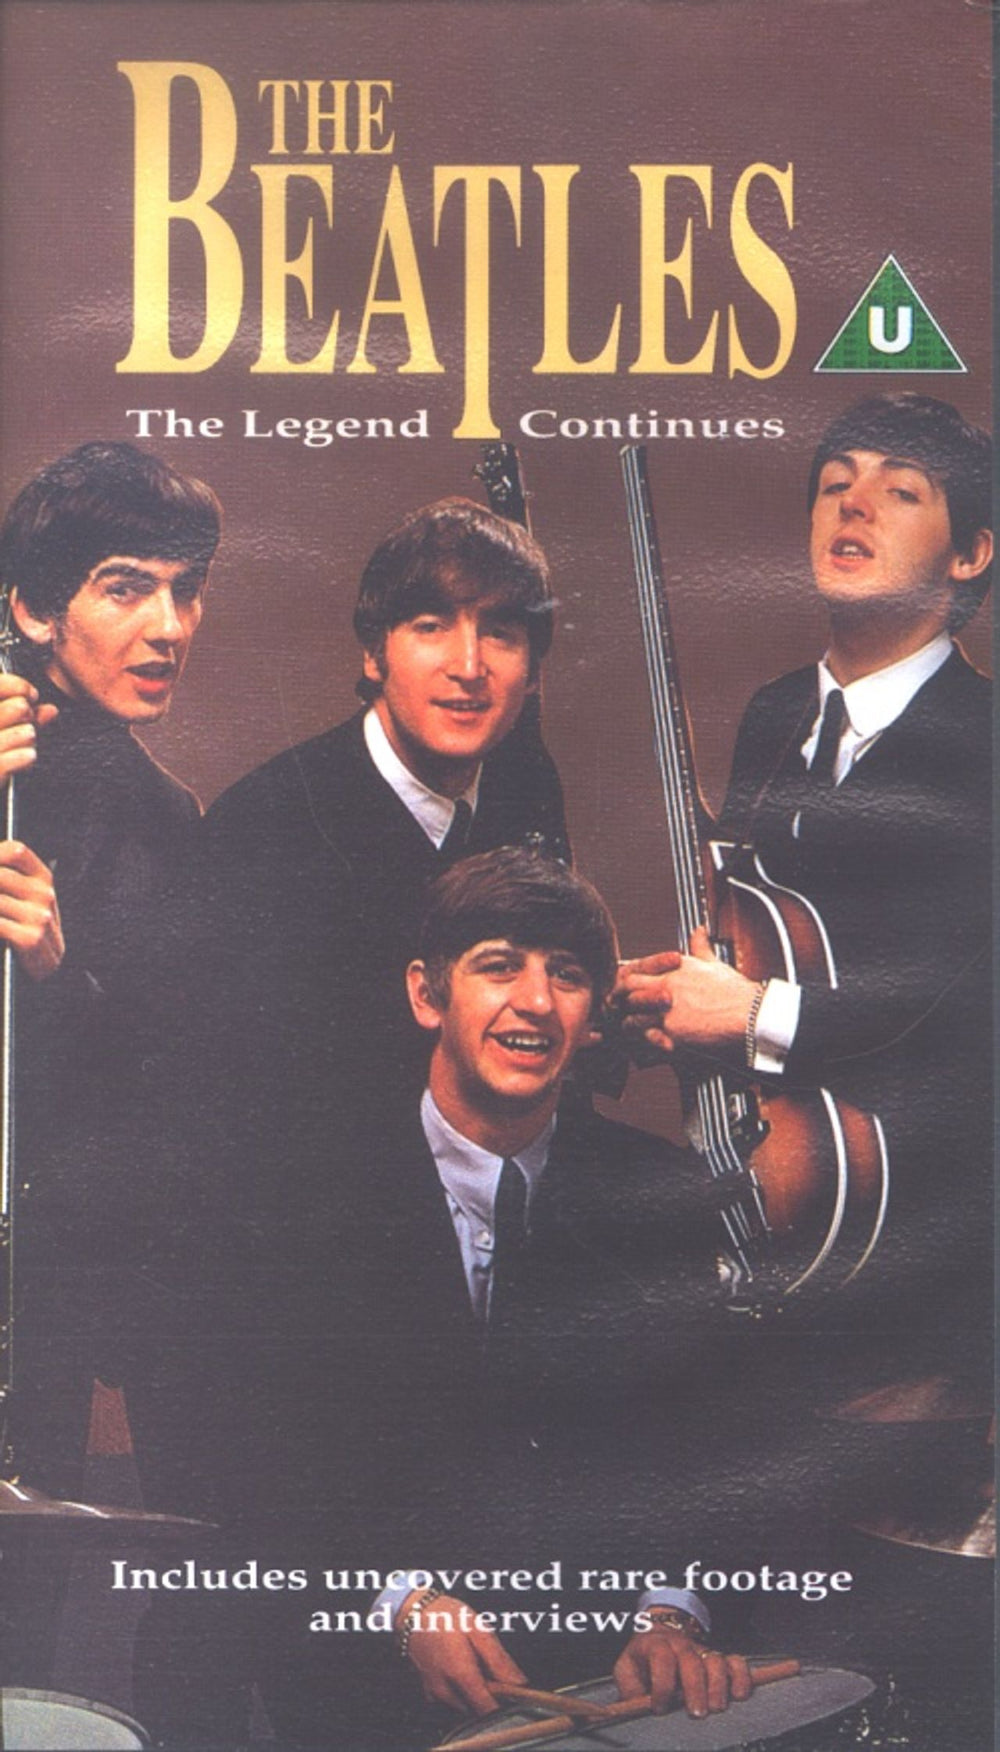 The Beatles The Legend Continues UK video (VHS or PAL or NTSC) SUK21252